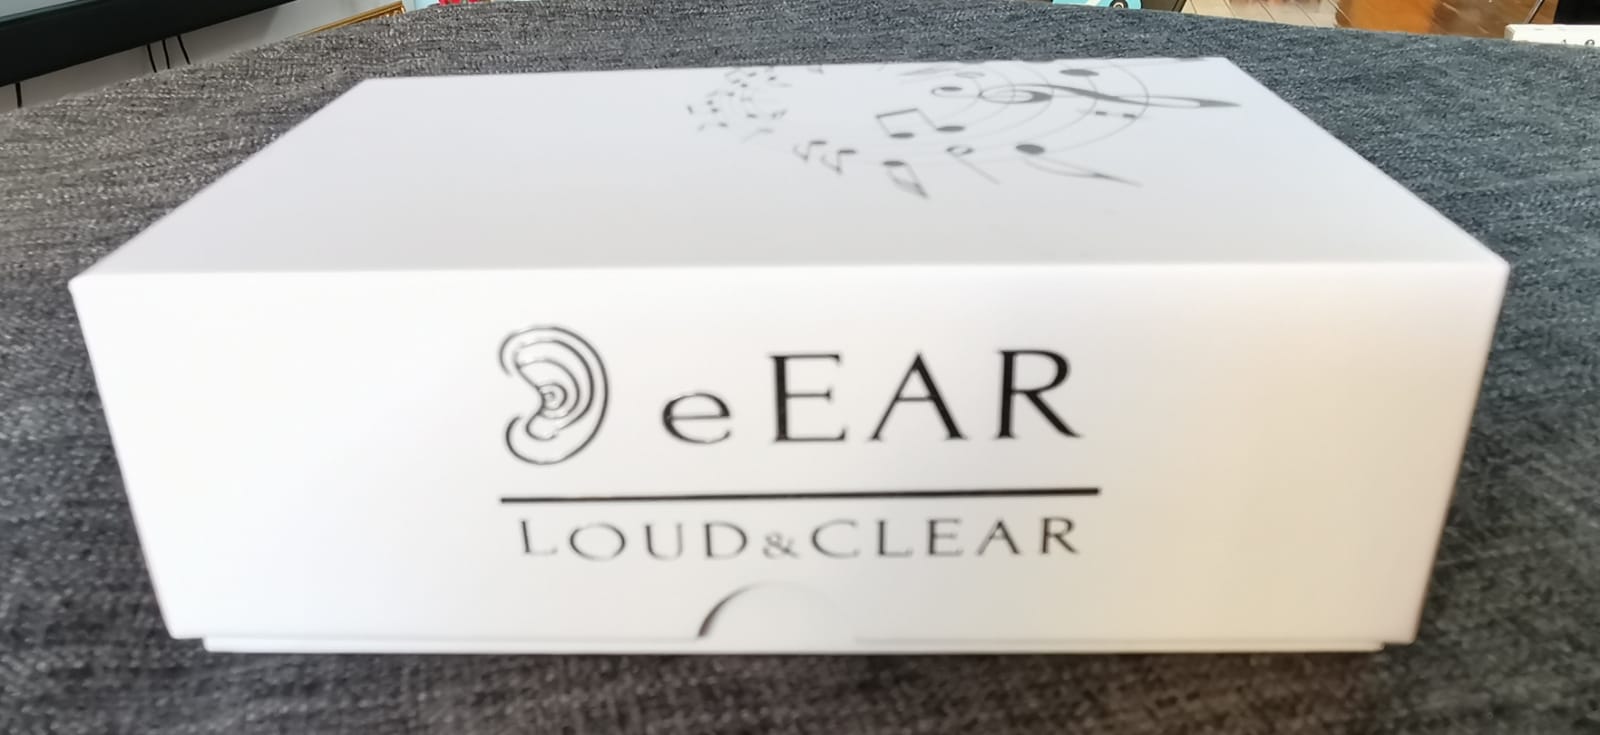 eEAR® Digital Hearing Aid, CIC (Complete in Canal), eEar CIC-T25-Pair Designed and Engineered in the USA For Right side EAR $79.88, For Left side EAR $79.88 for Pair (right + left) = $ 149.88 Sold 35,000+ worldwide